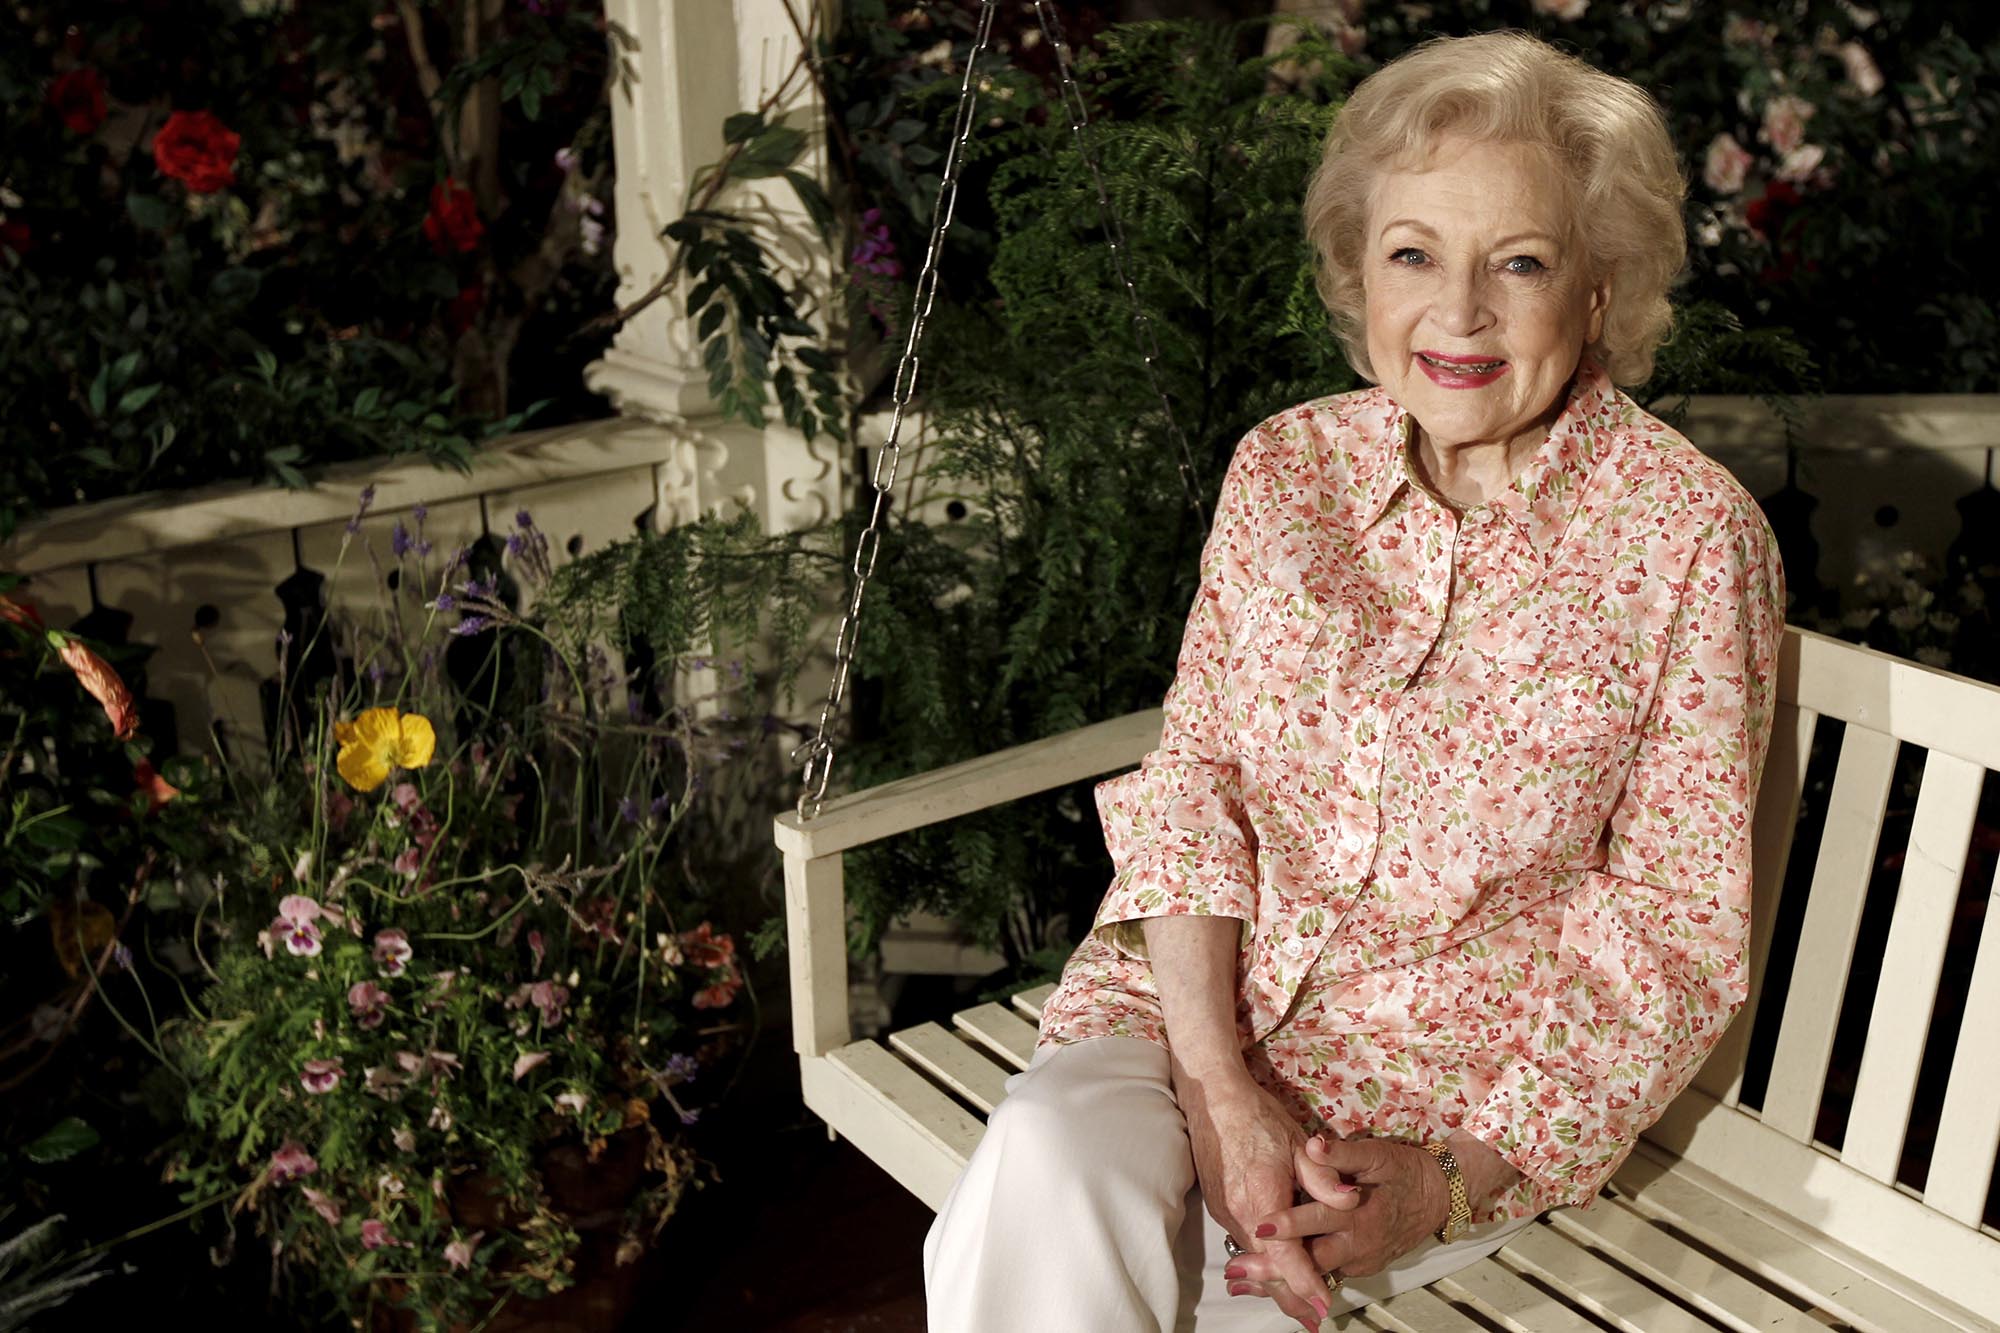 Betty White is loved by all generations.